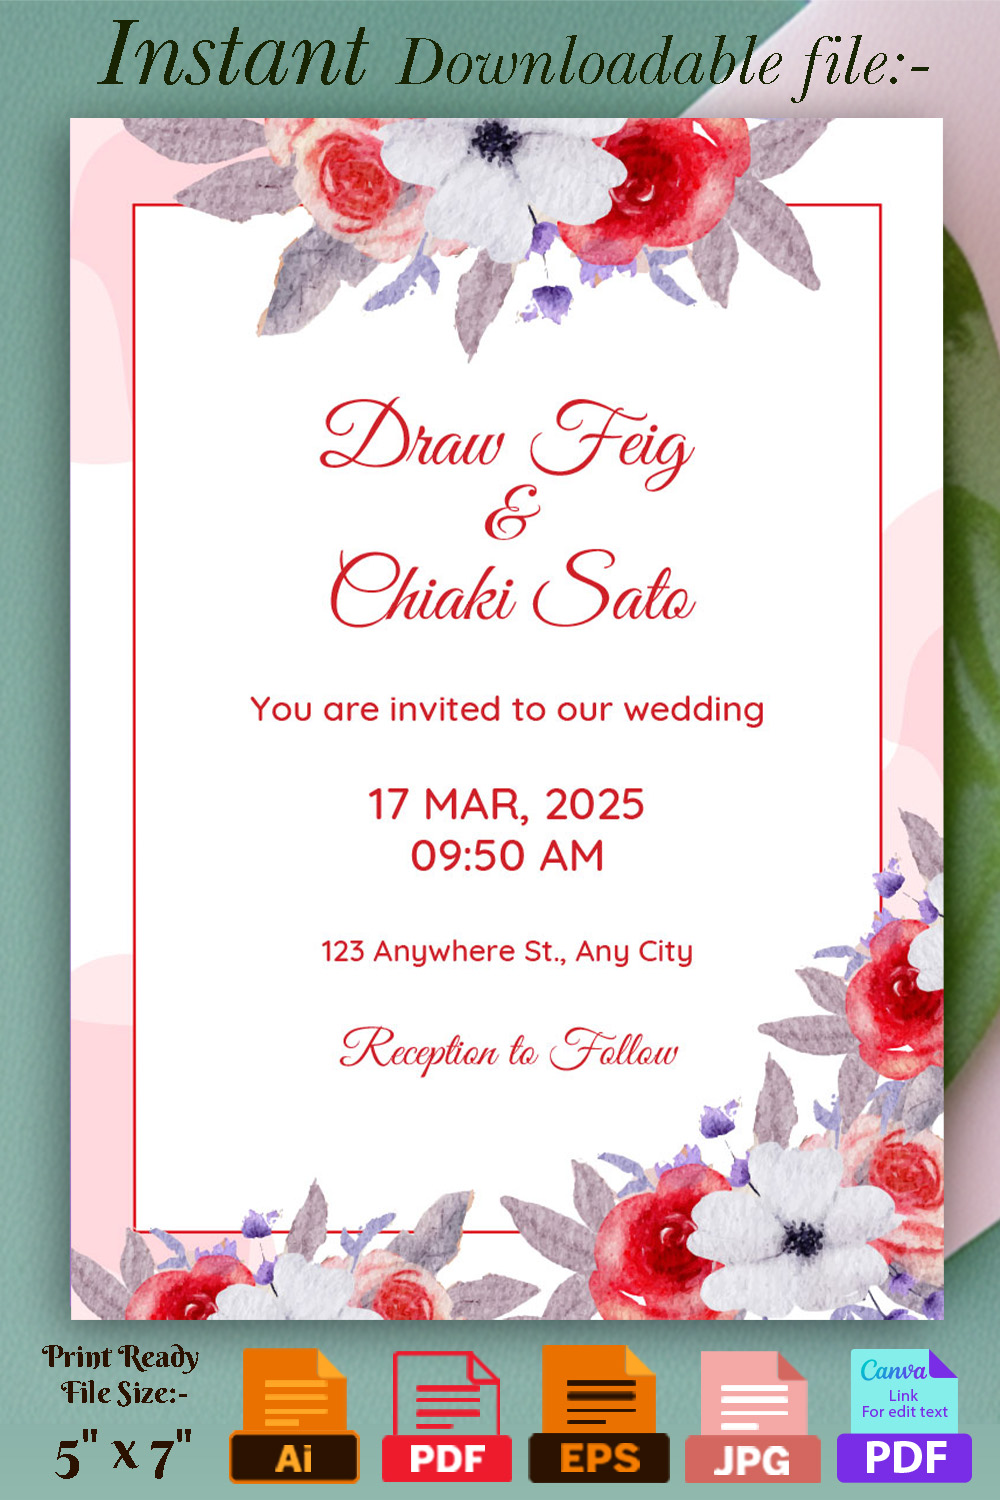 Image with wonderful wedding invitation in pink colors and flowers.